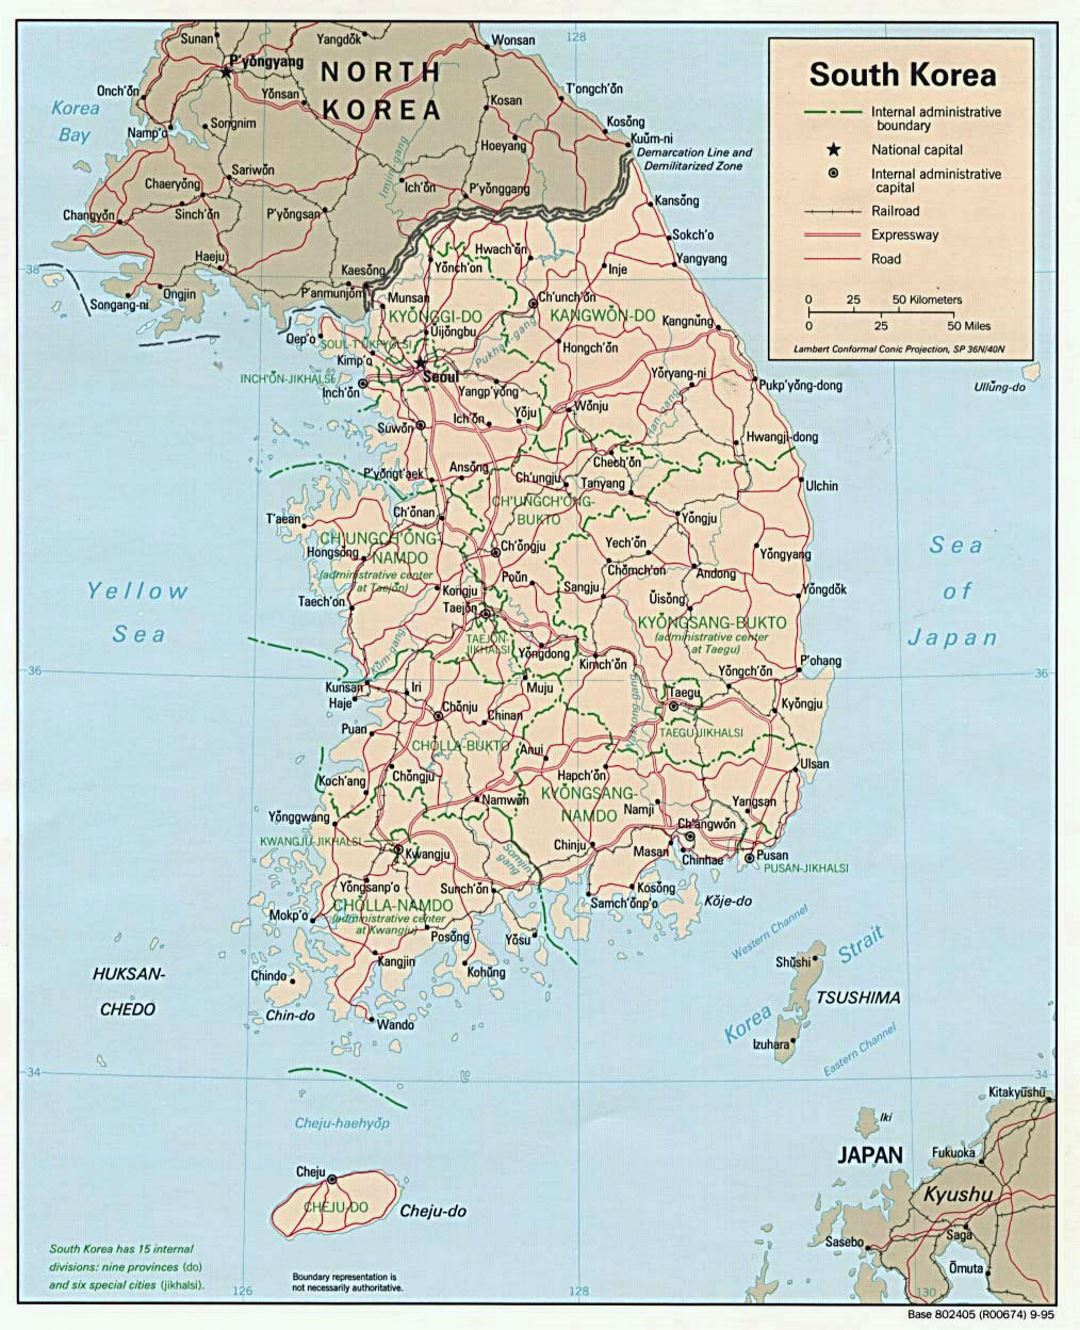 Detailed political and administrative map of South Korea with roads